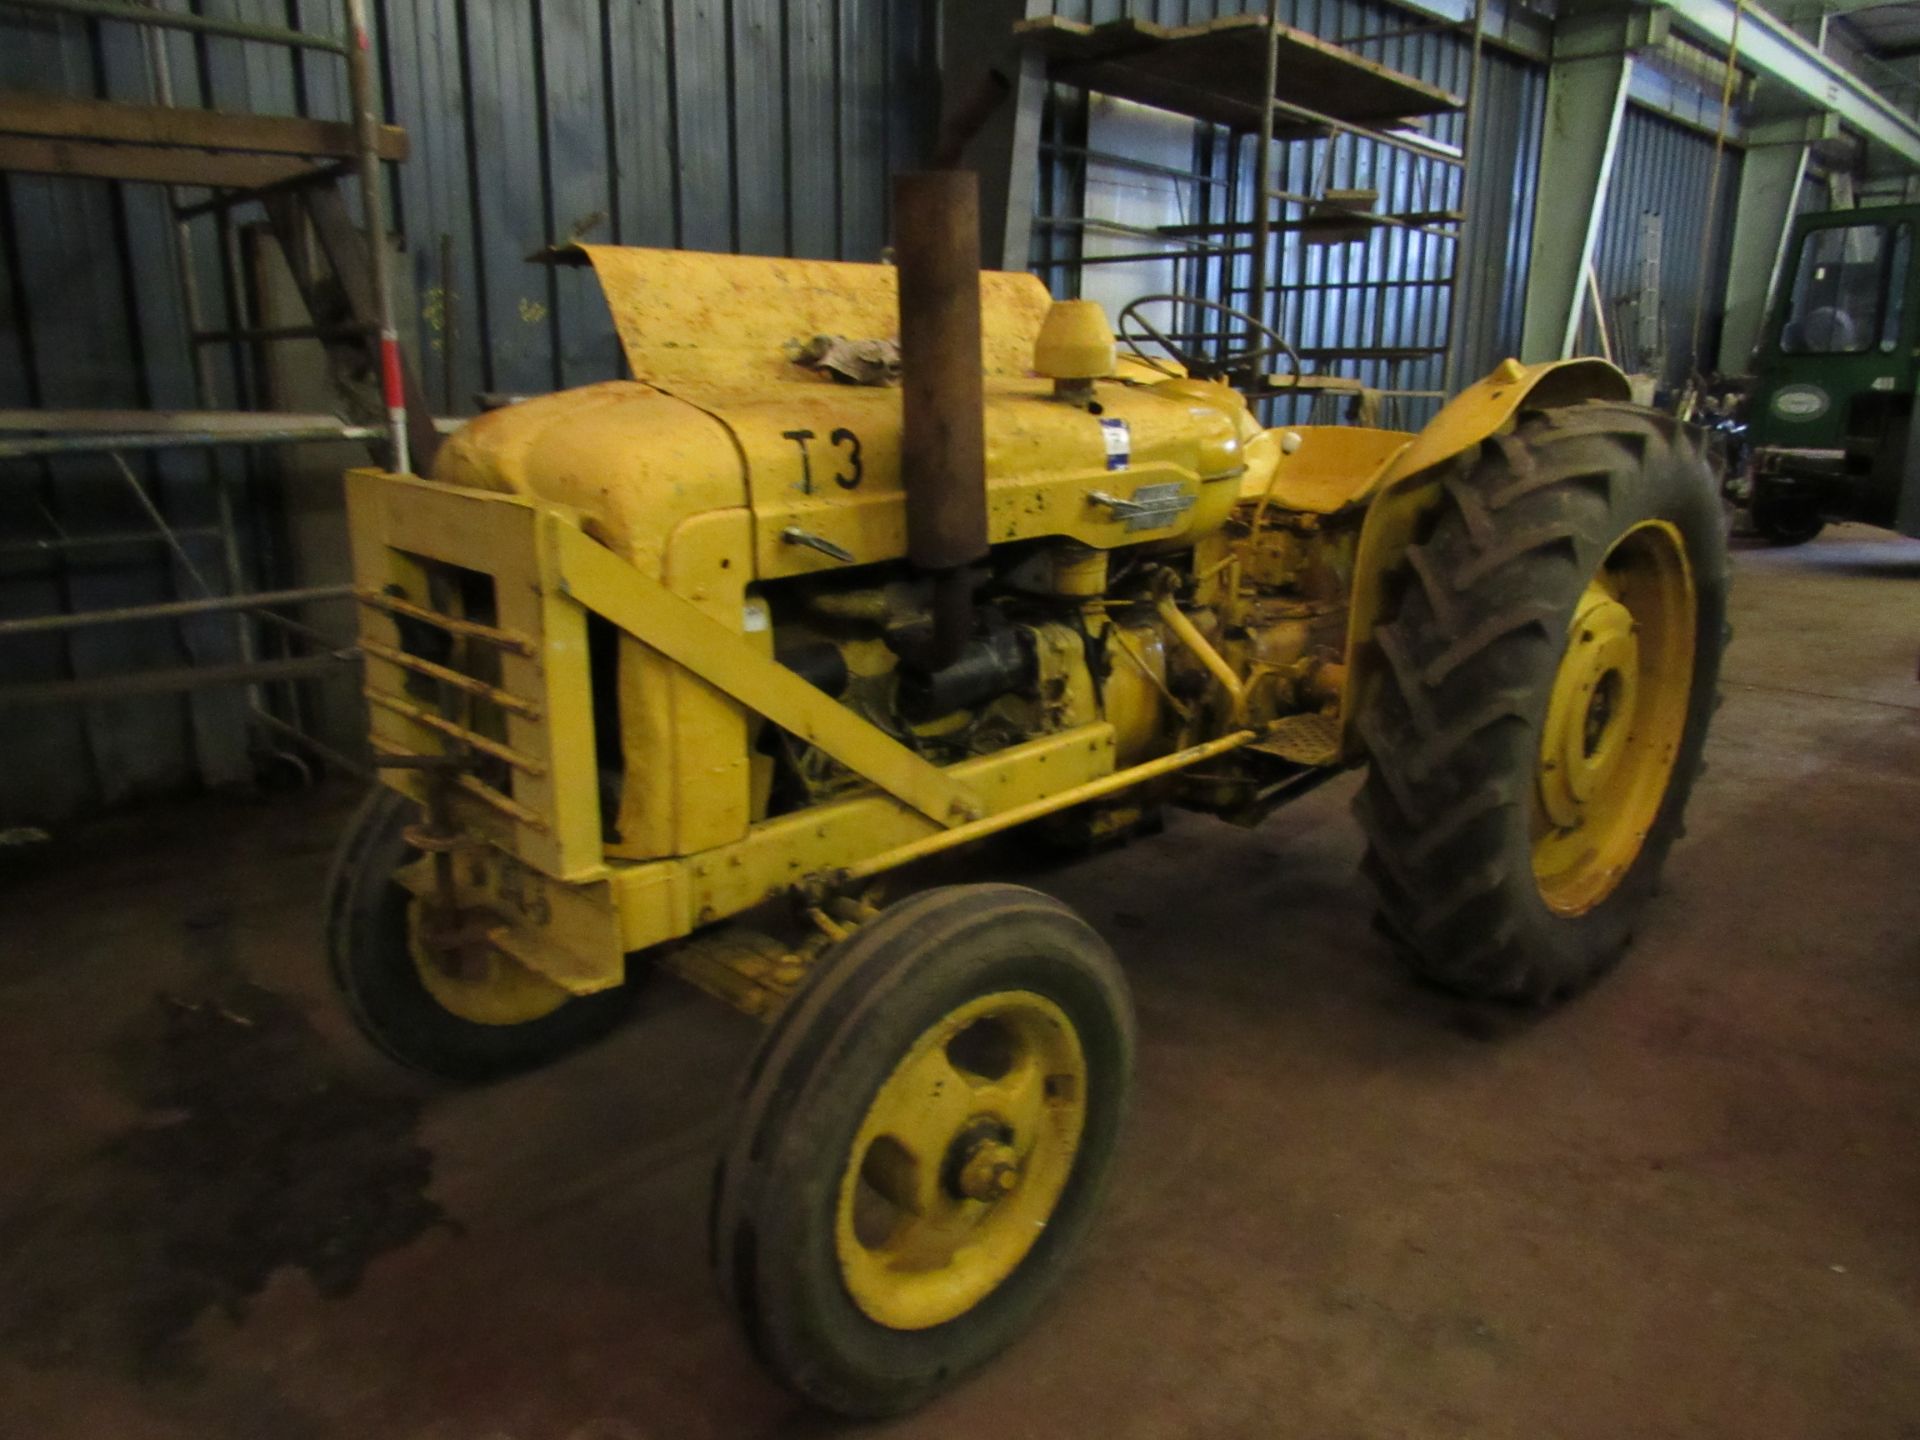 Fordson Power Major Industrial Vintage Tractor - Image 2 of 11